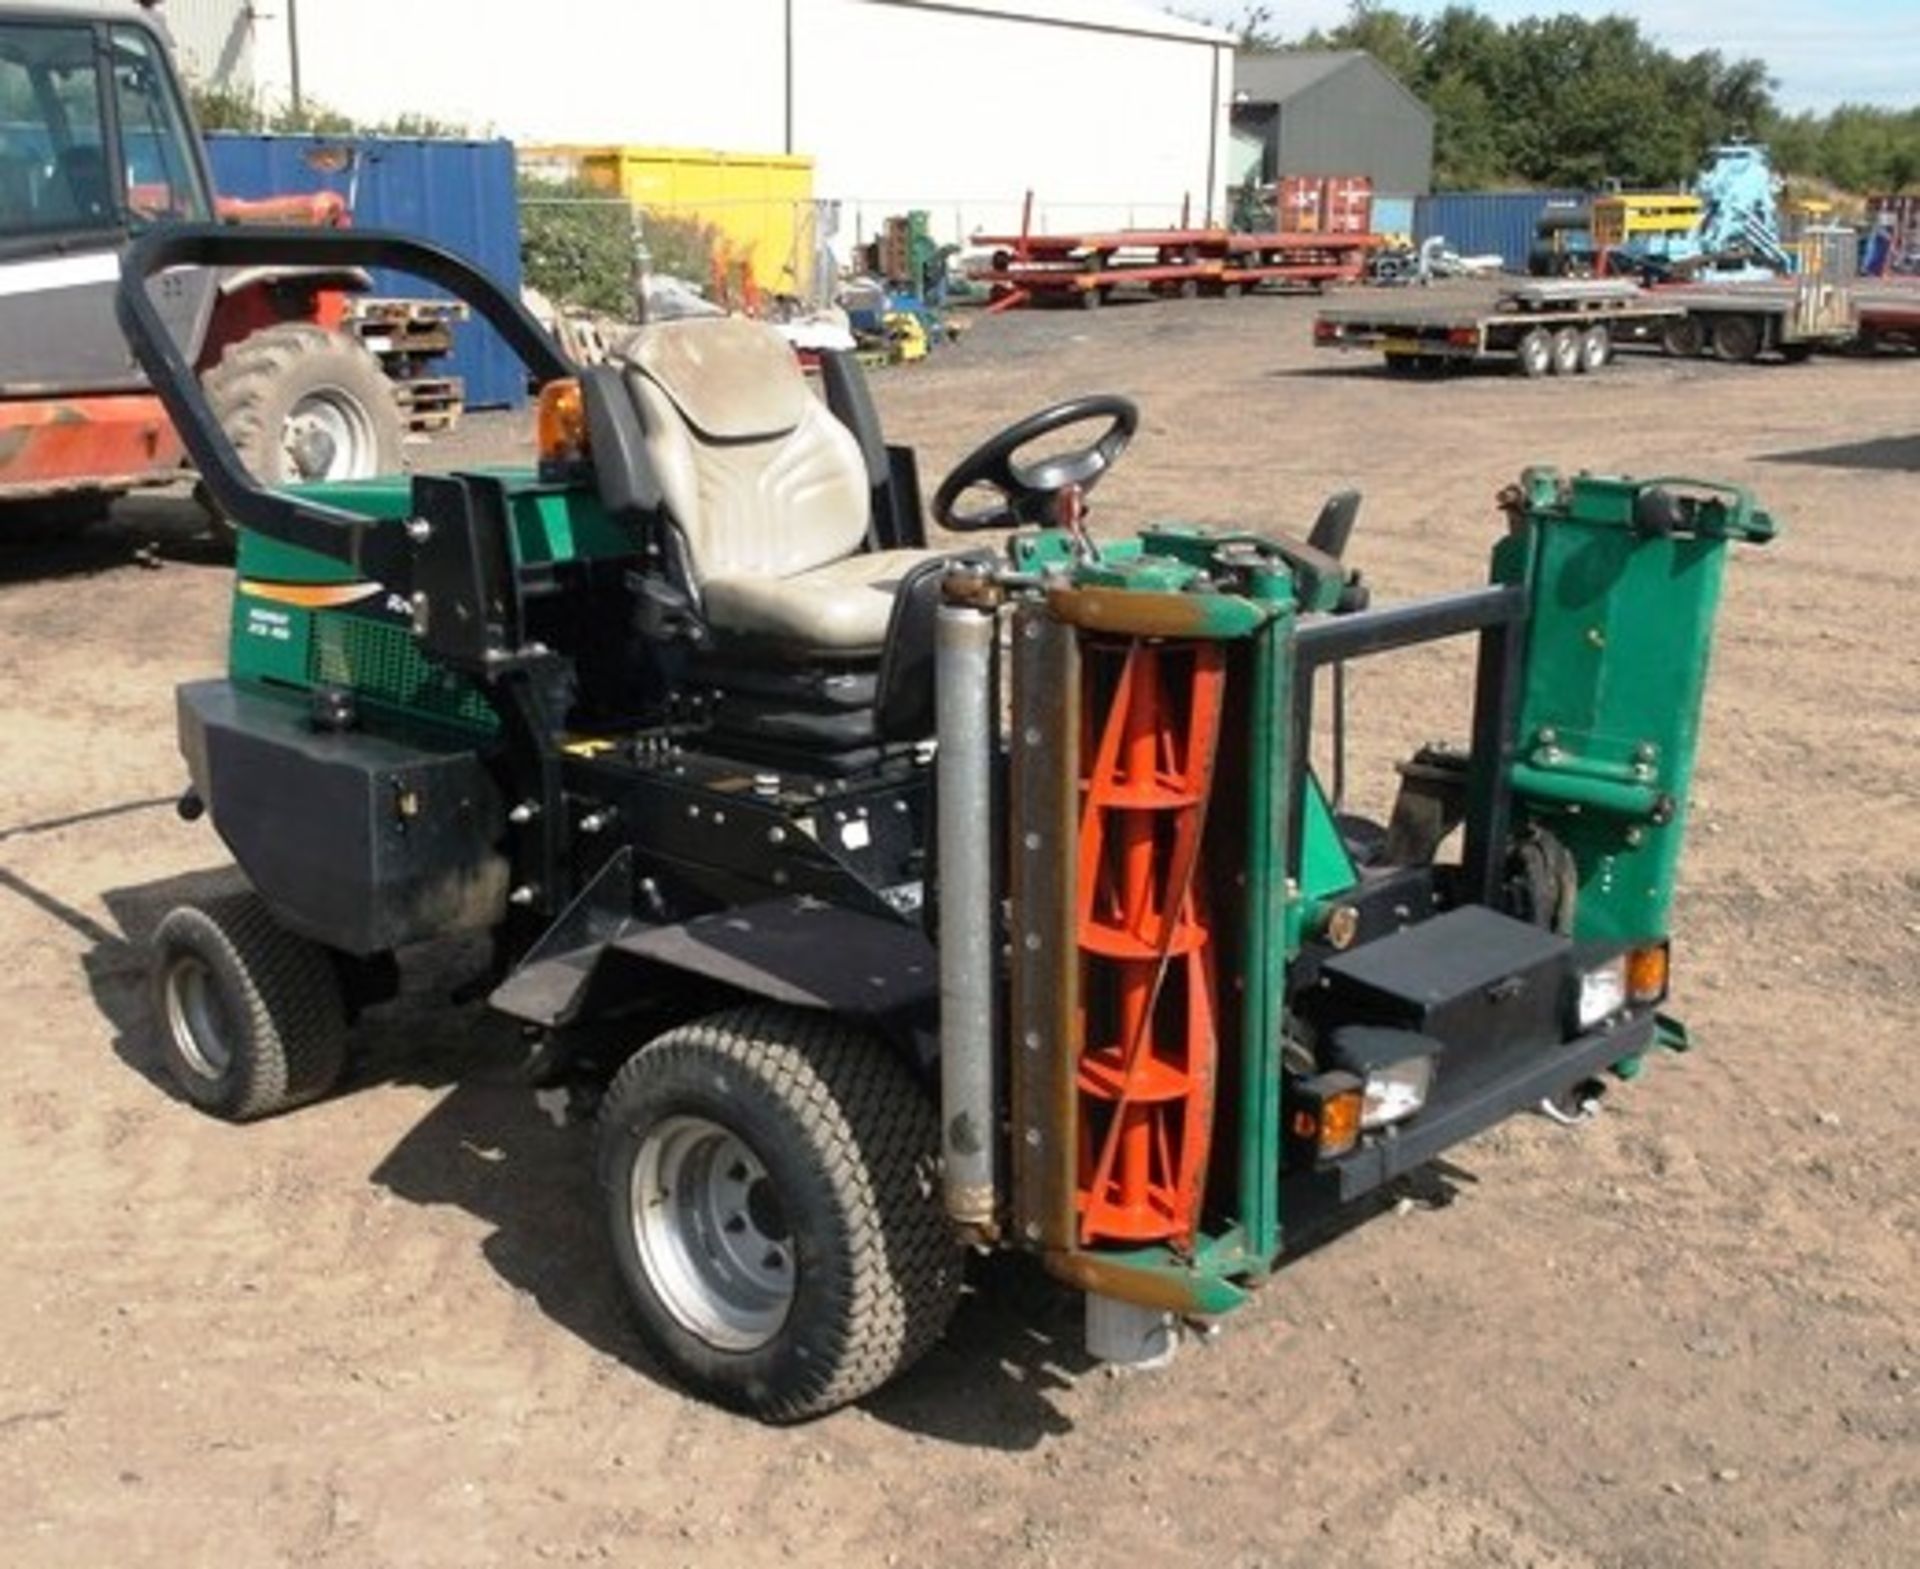 RANSOMES HIGHWAY 2130 MOWER, 5430 HOURS, SN CU000659, FT NO 3250 DOCUMENTS IN OFFICE - Image 2 of 6